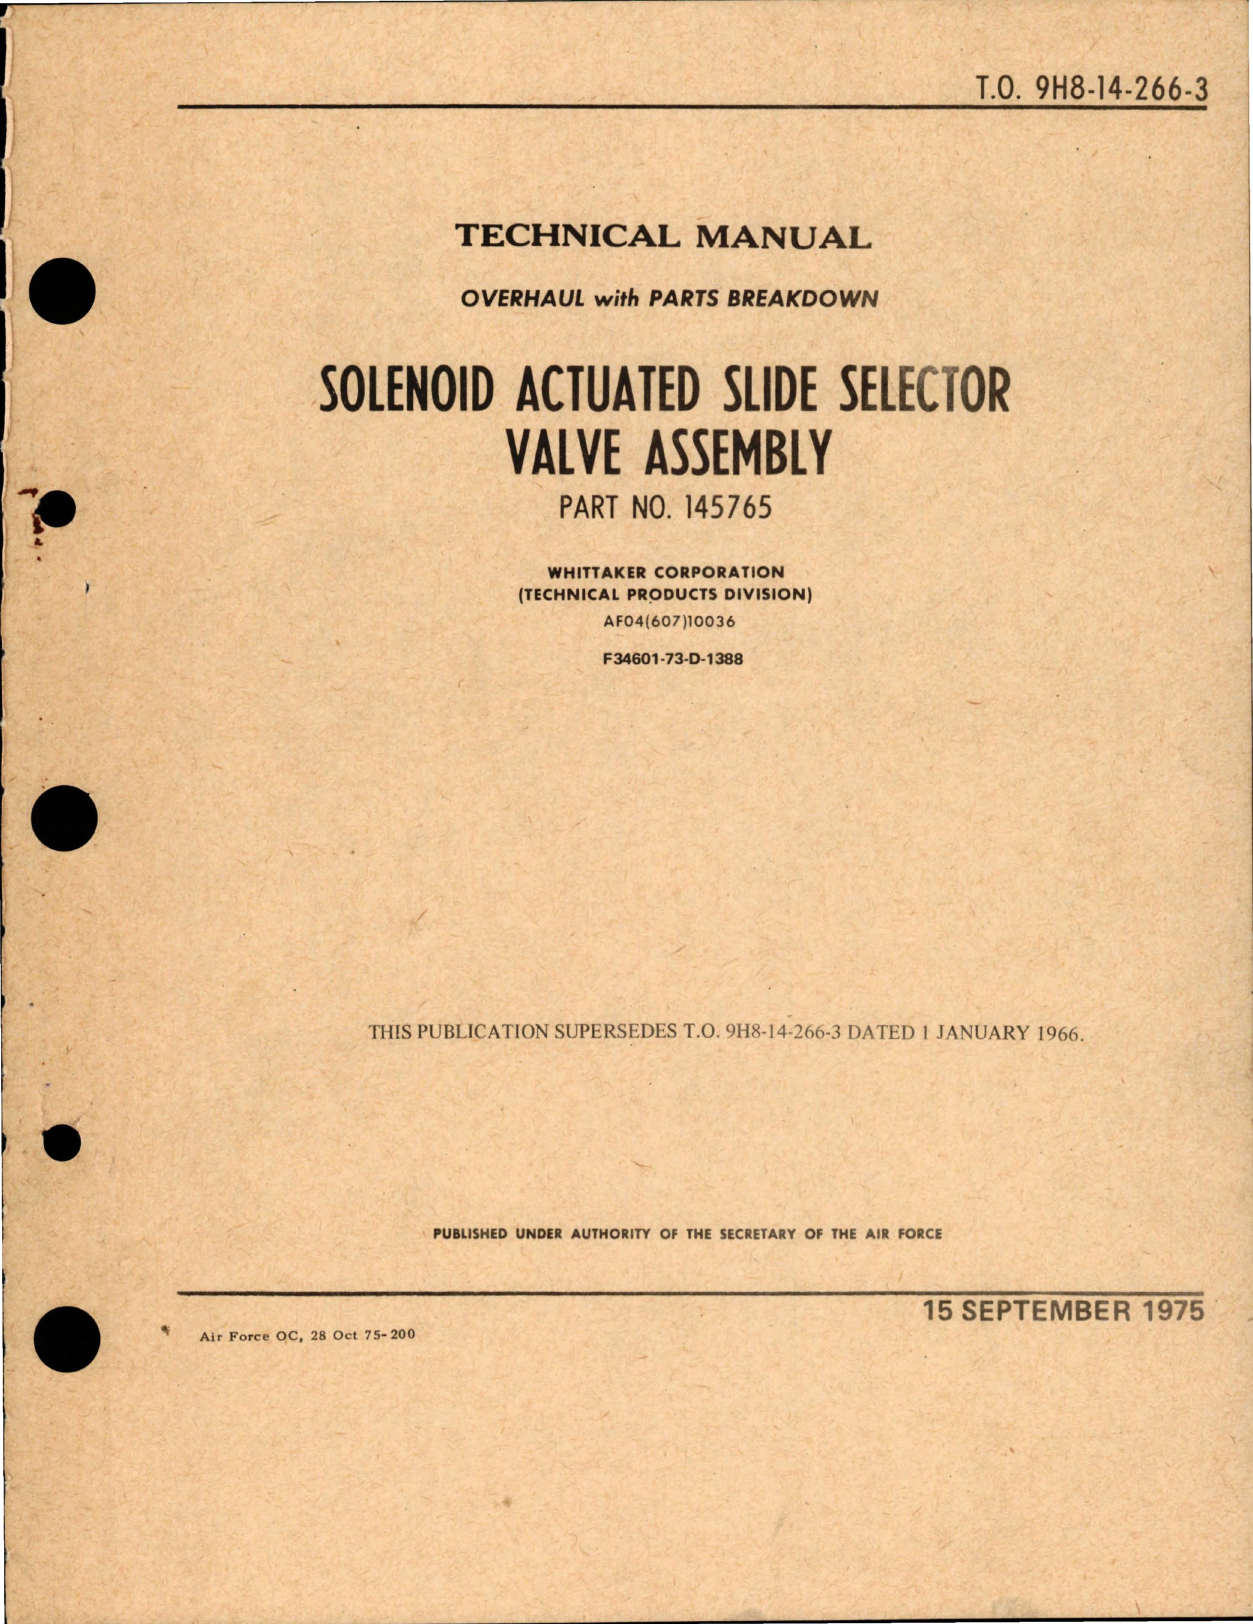 Sample page 1 from AirCorps Library document: Overhaul with Parts Breakdown for Solenoid Actuated Slide Selector Valve Assembly - Part 145765 